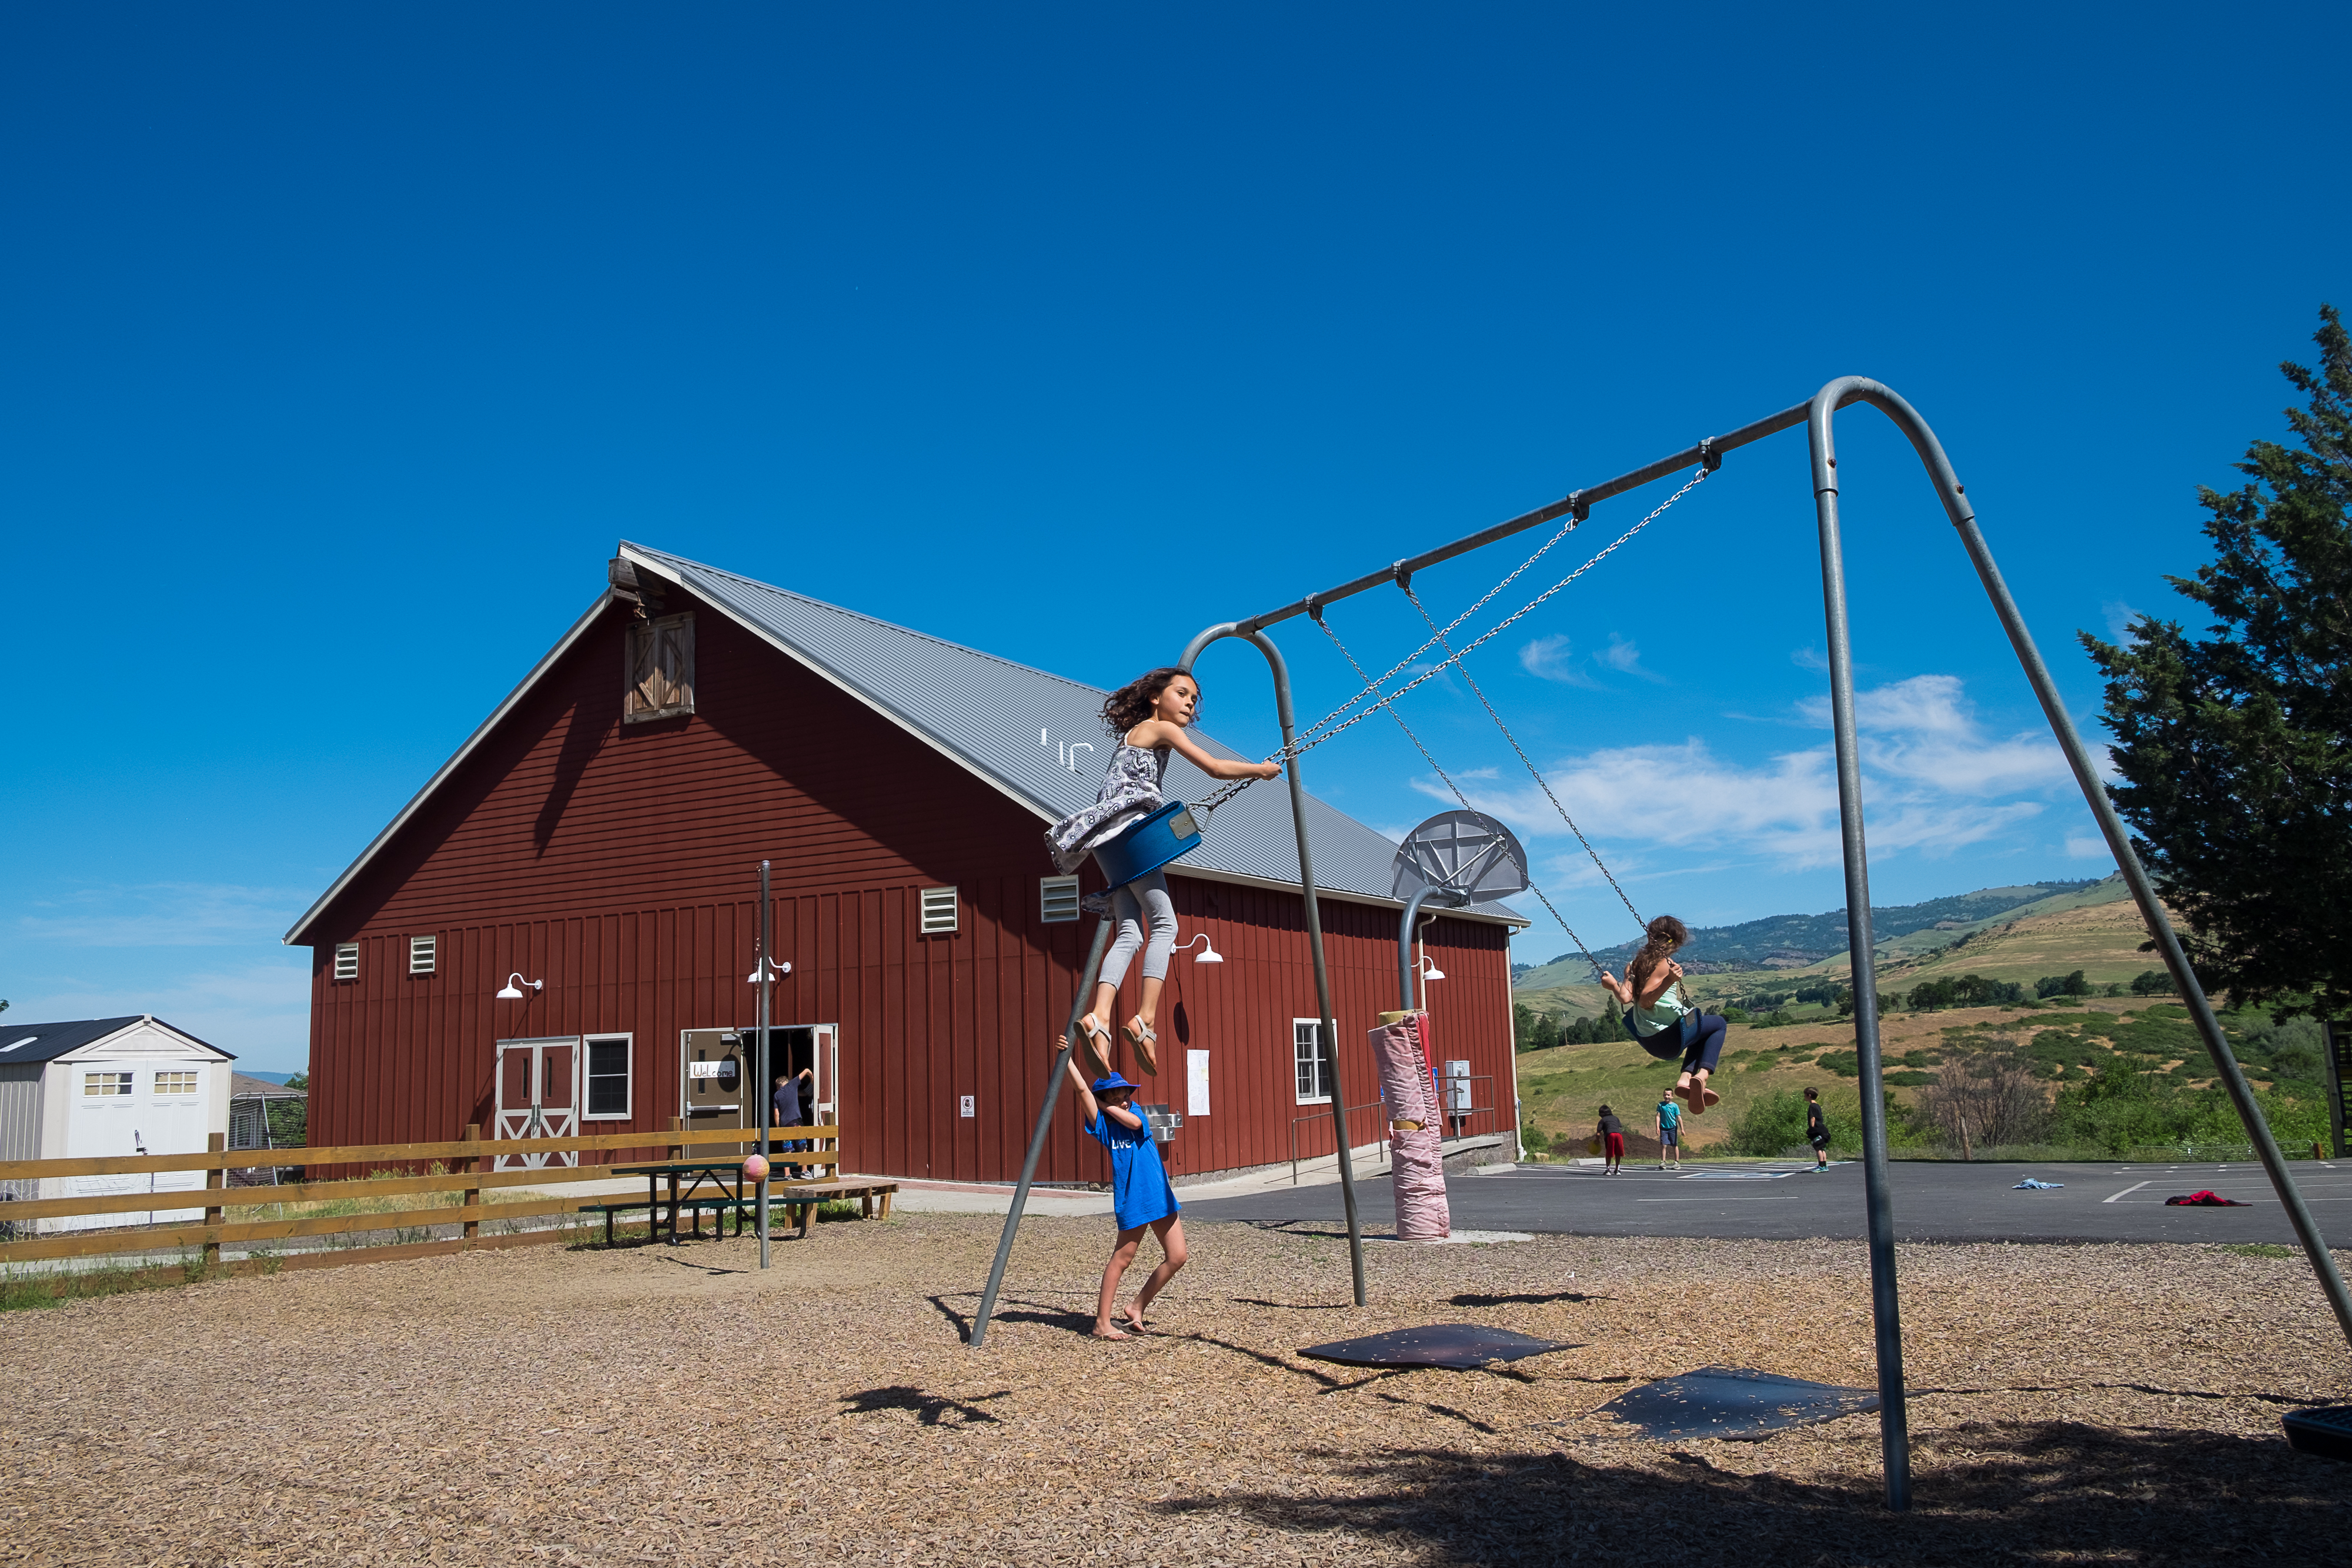 Children playing on swings in a sunny playground with a clear blue sky. A large red barn and other outbuildings are in the background, creating a rural setting.